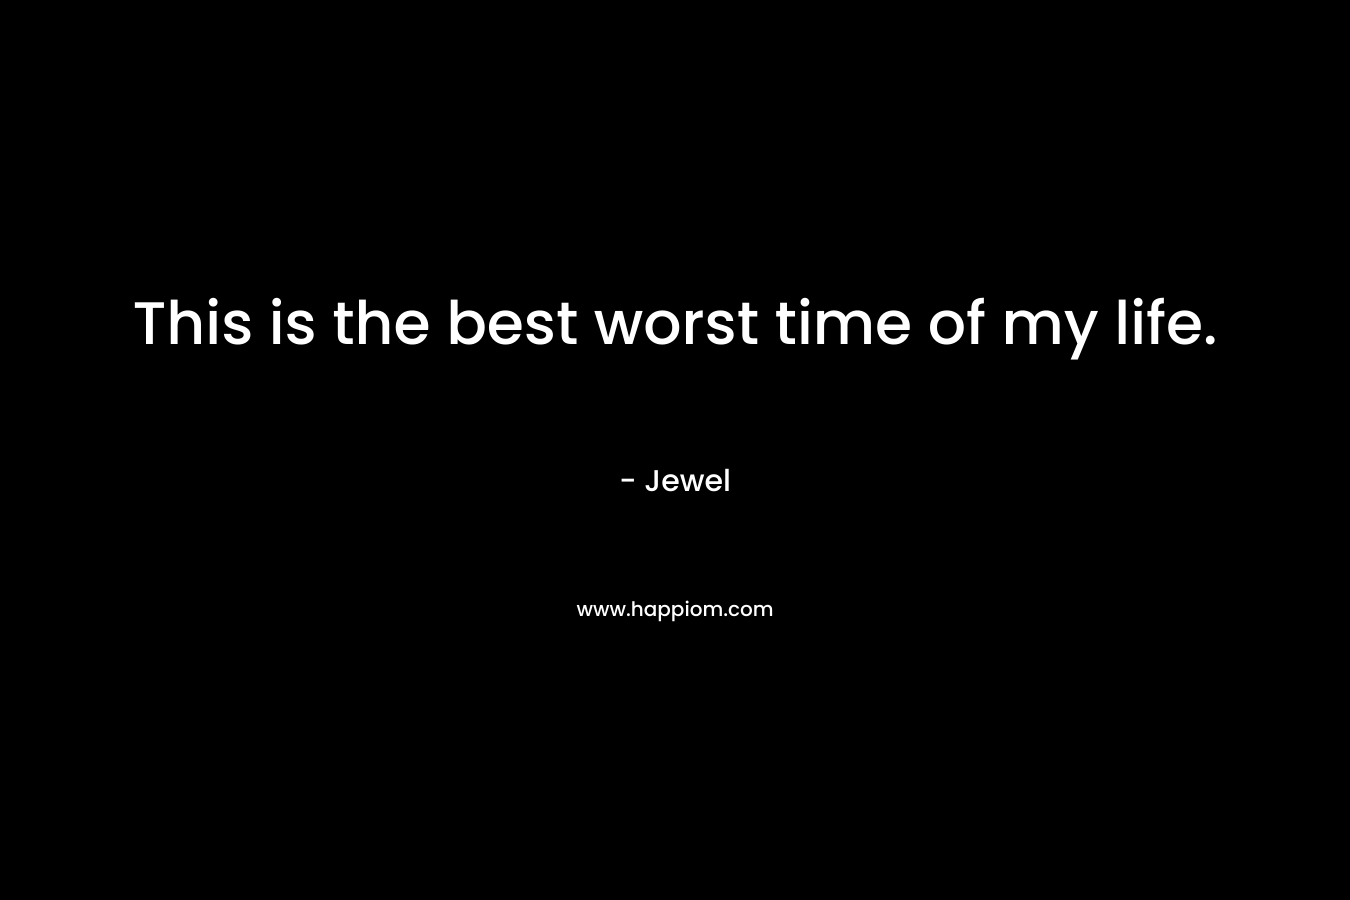 This is the best worst time of my life. – Jewel